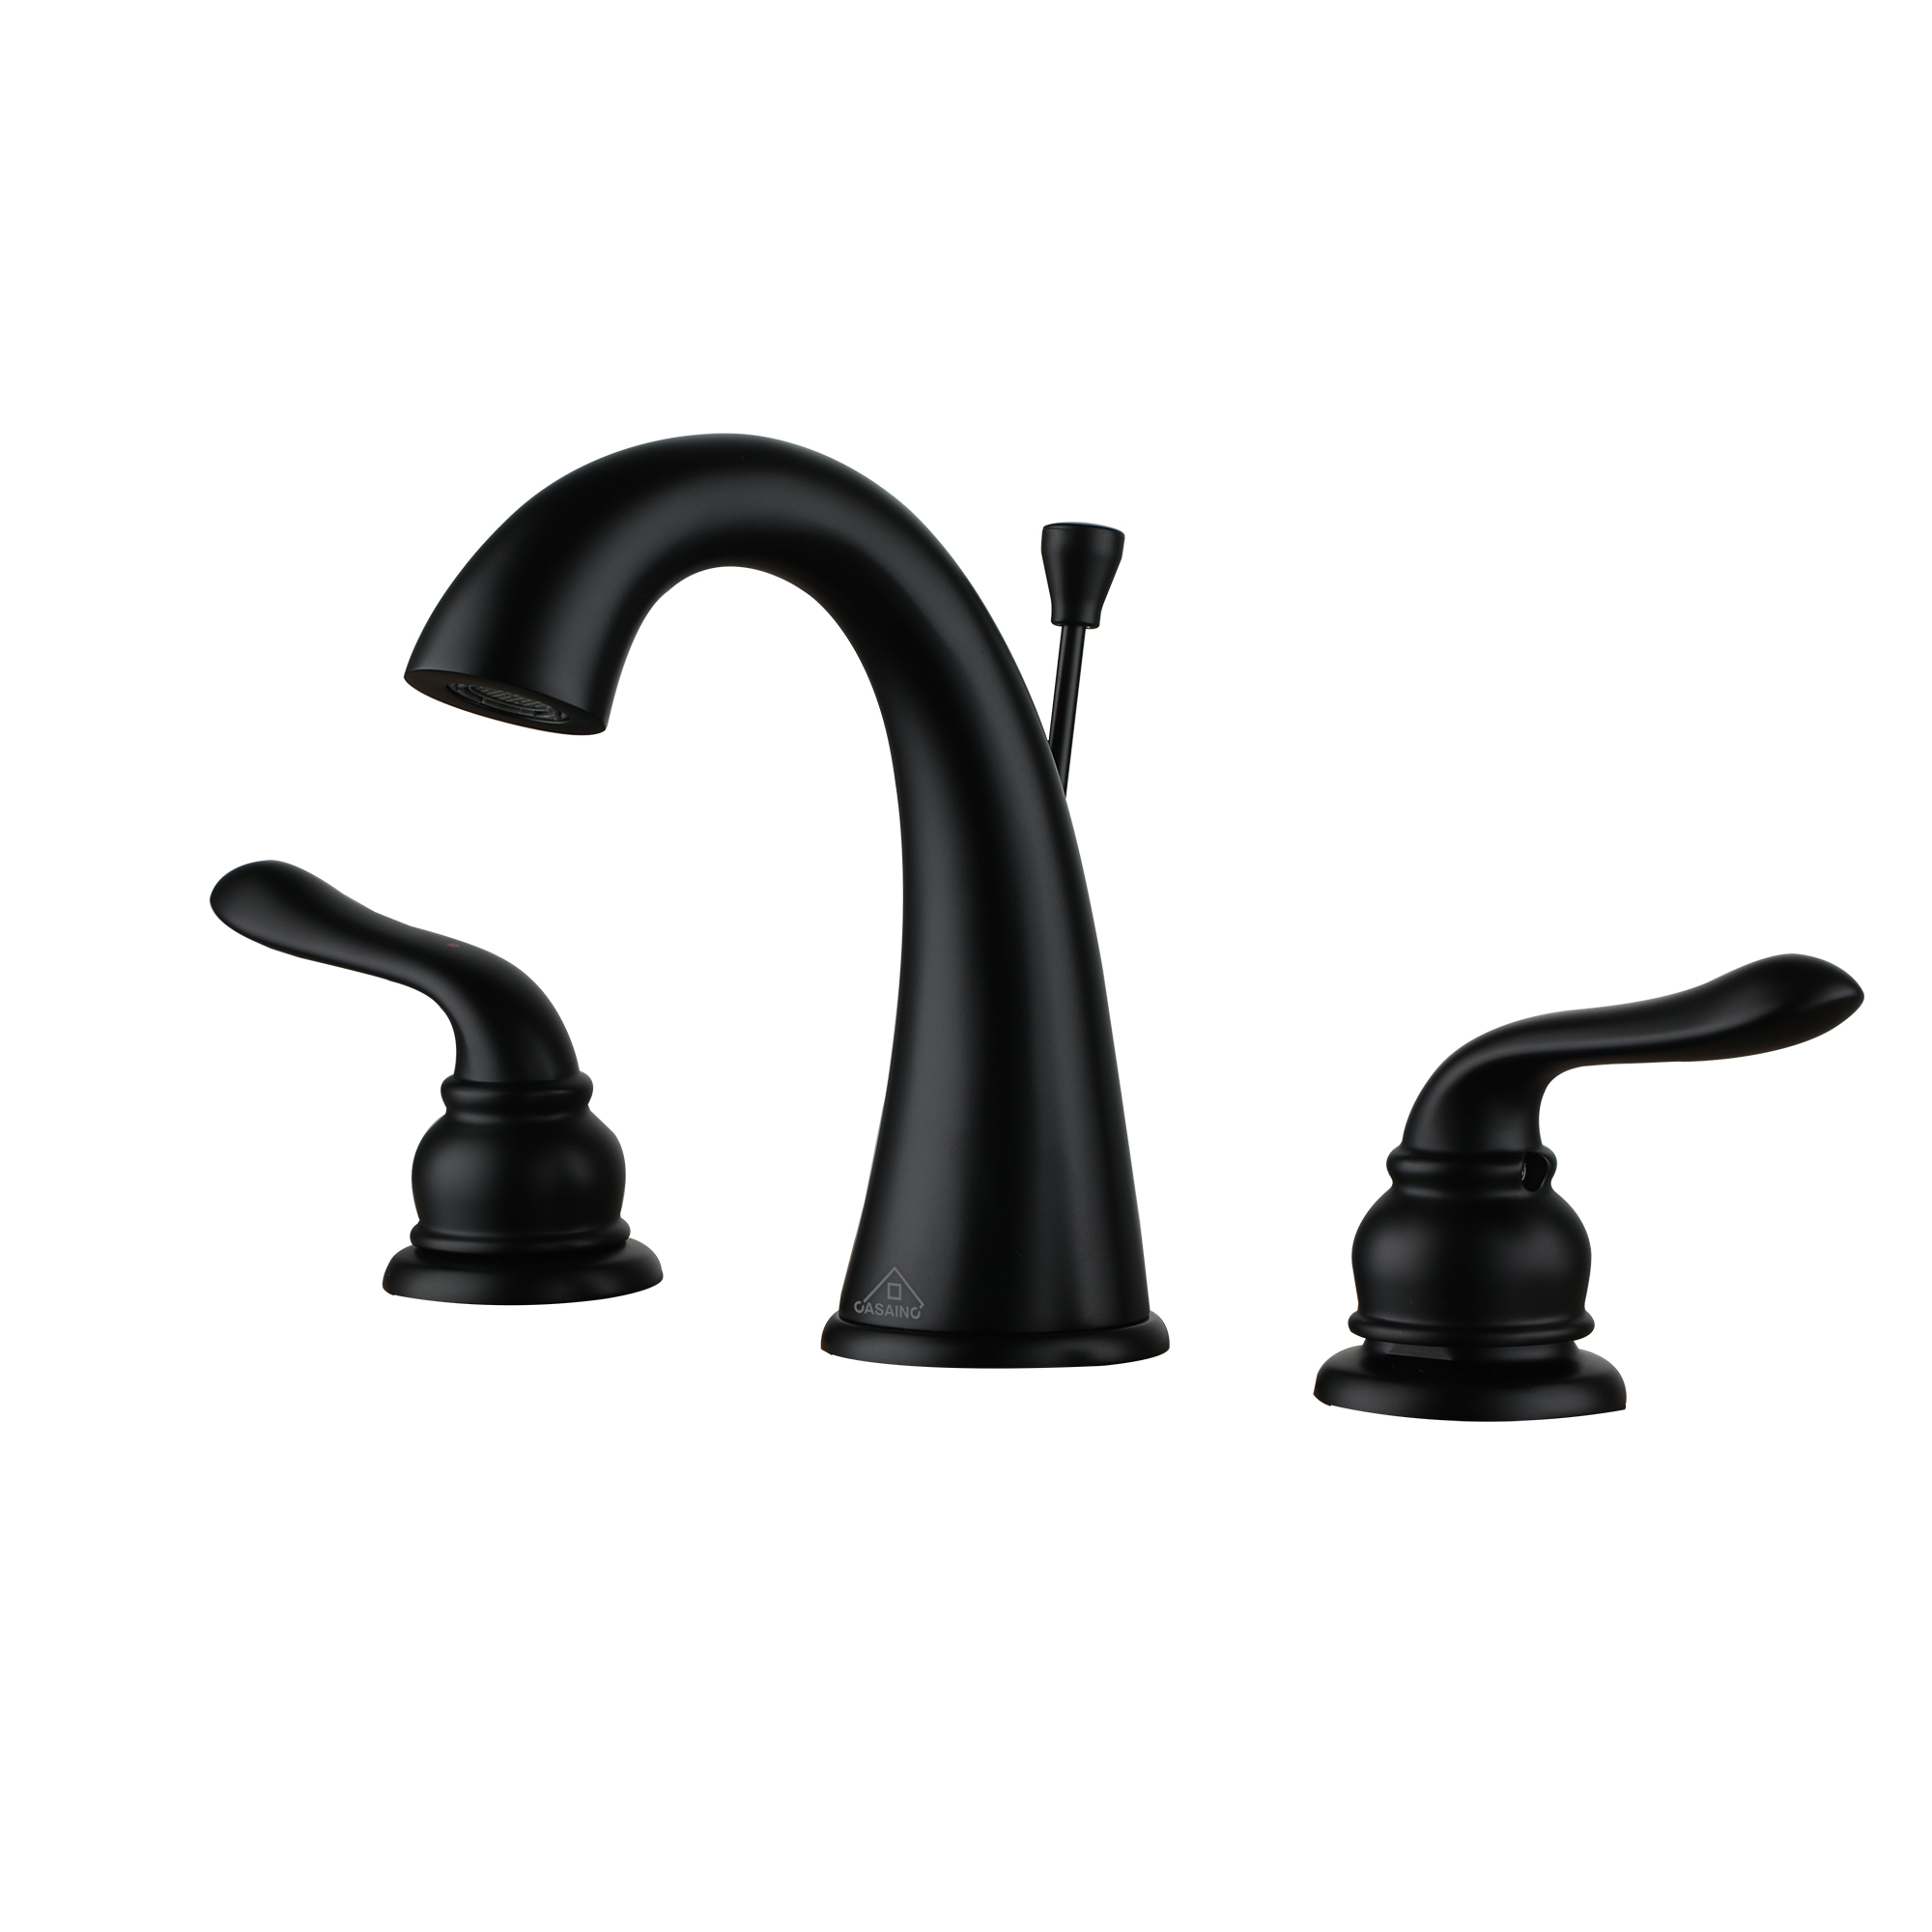 Luxurious Bathroom Sink Faucet Set with Dual Handles and Drain Parts, Matte Black Finish